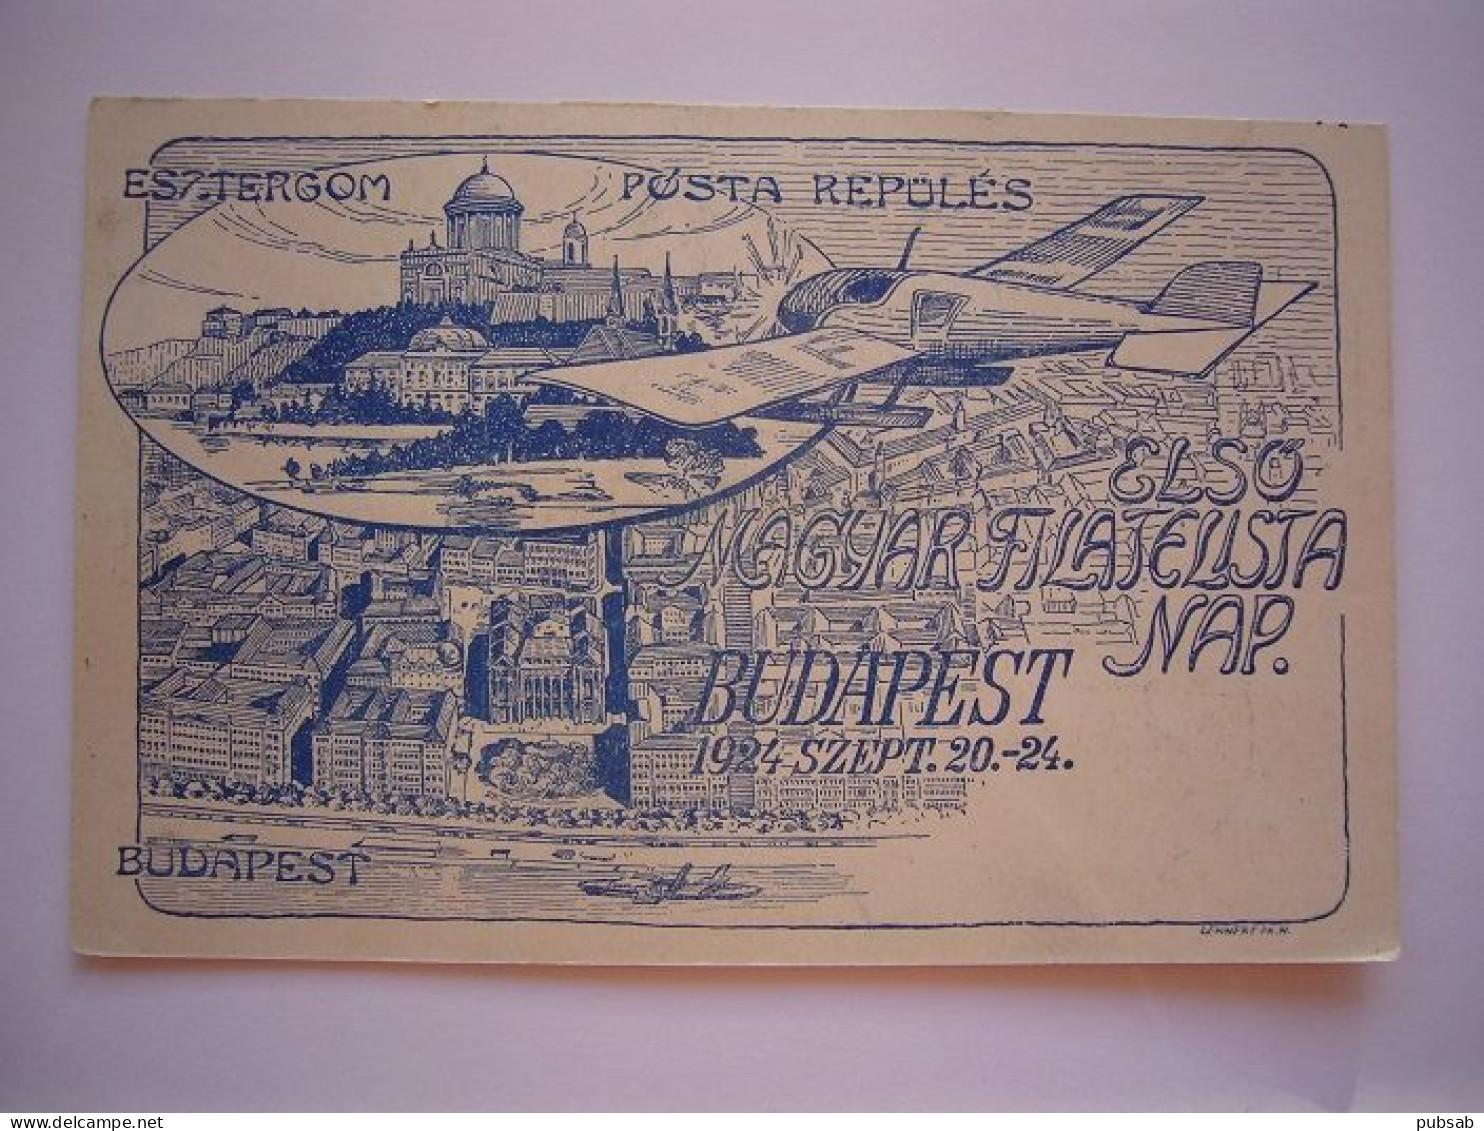 Avion / Airplane / ES7. TERGOM / Seaplane Over Budapest / Card Posted At Budapest To Esztergom / Sep 23, 1923 - 1919-1938: Between Wars